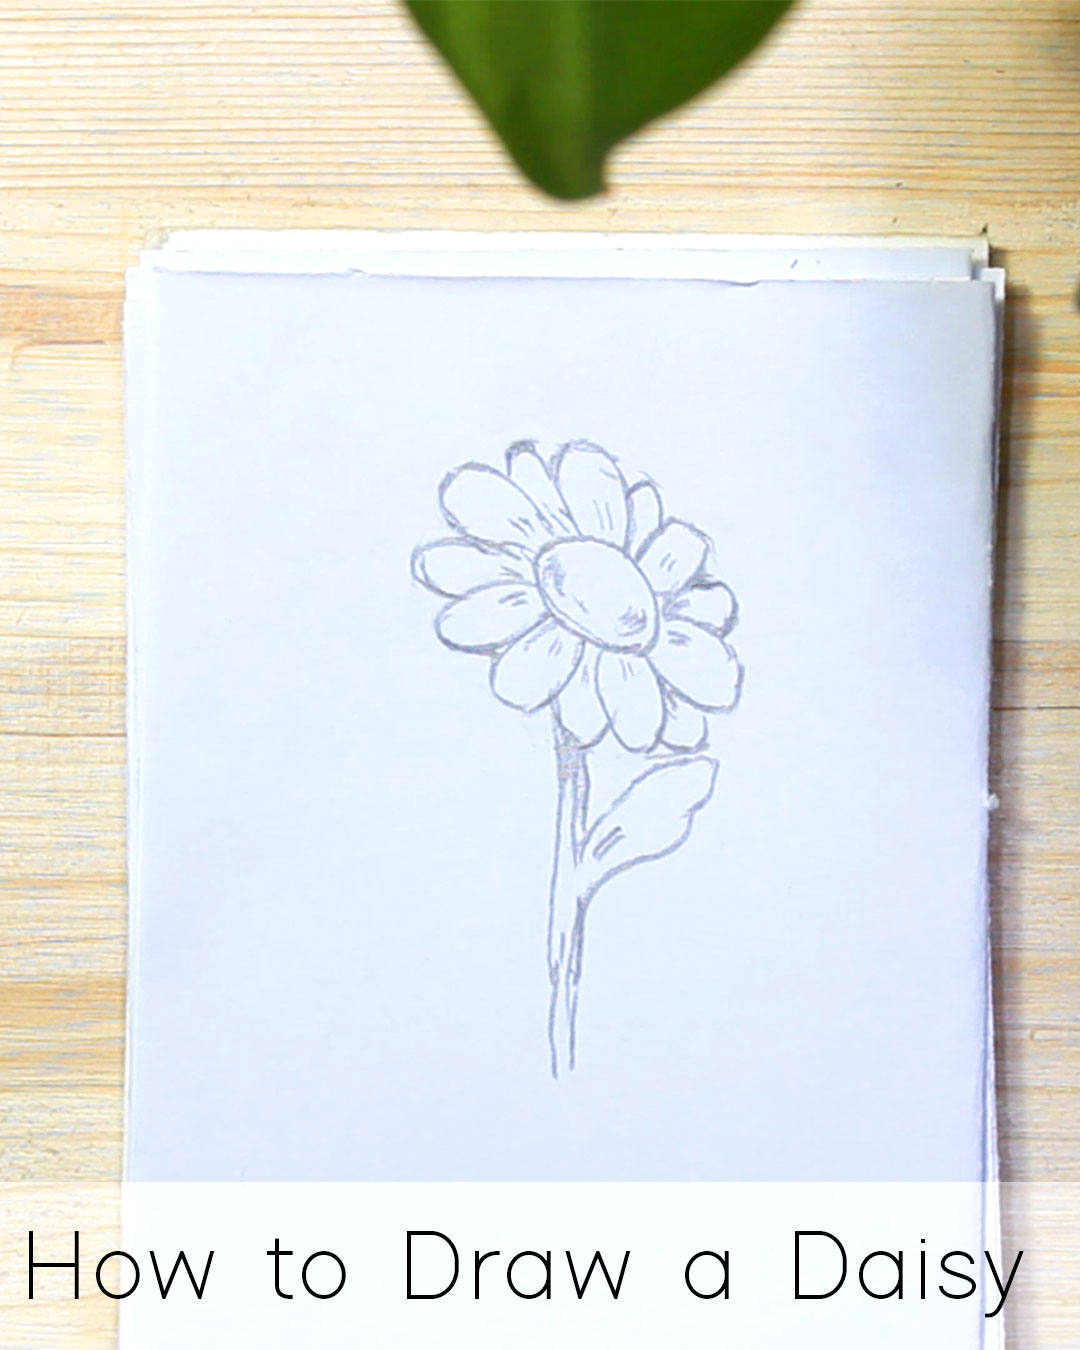 Learn to Draw Beautiful Daisies - Step-by-Step Guide